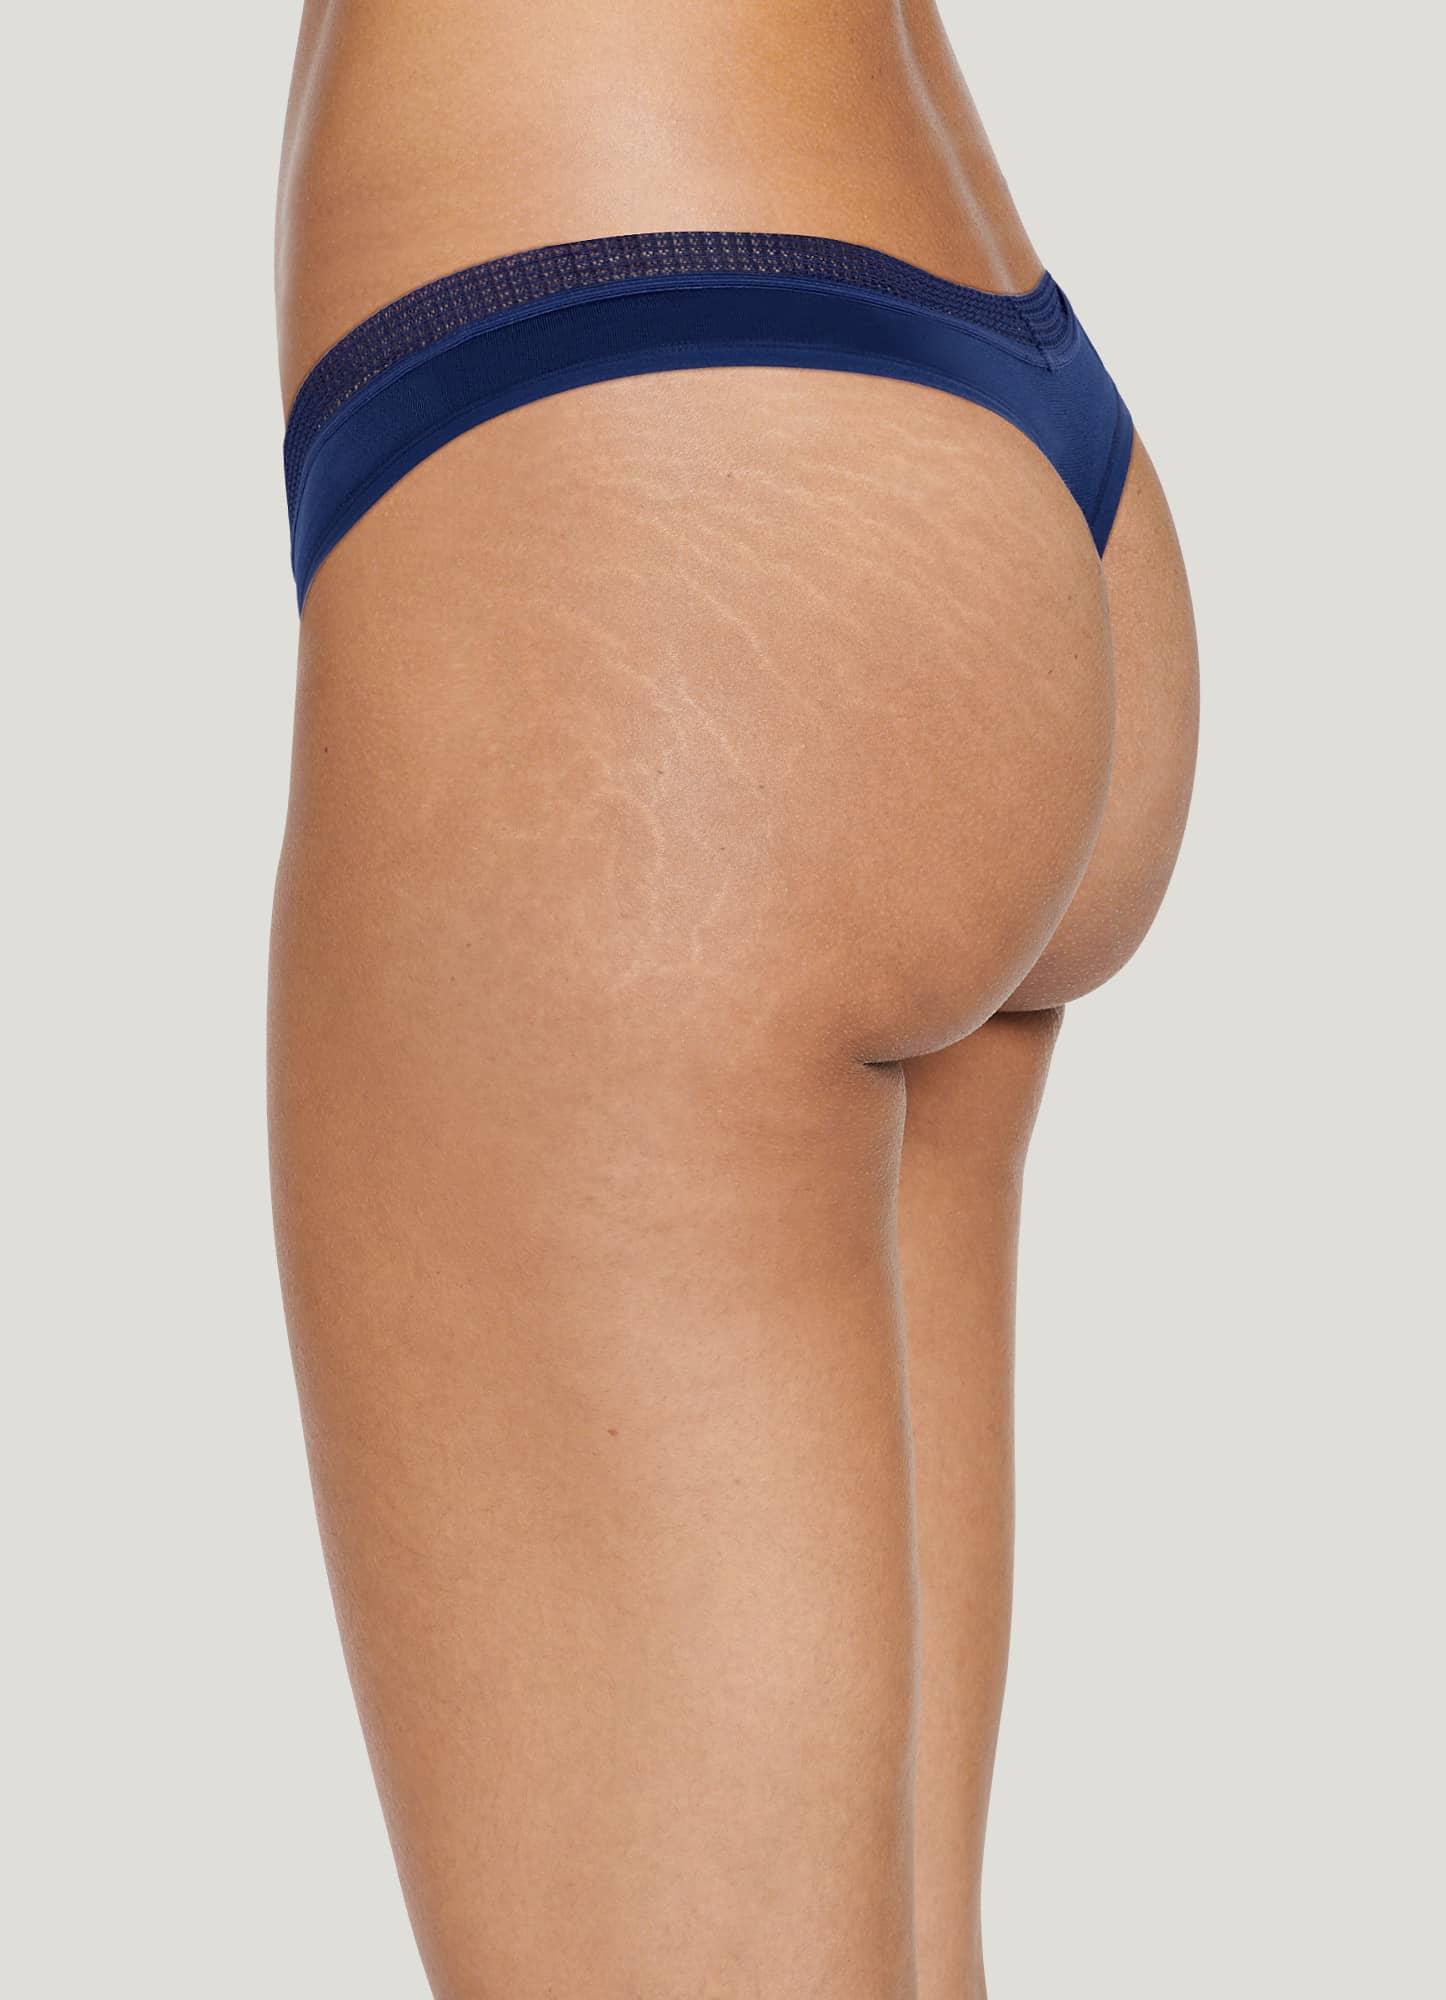 The Smoothing Lace Thong